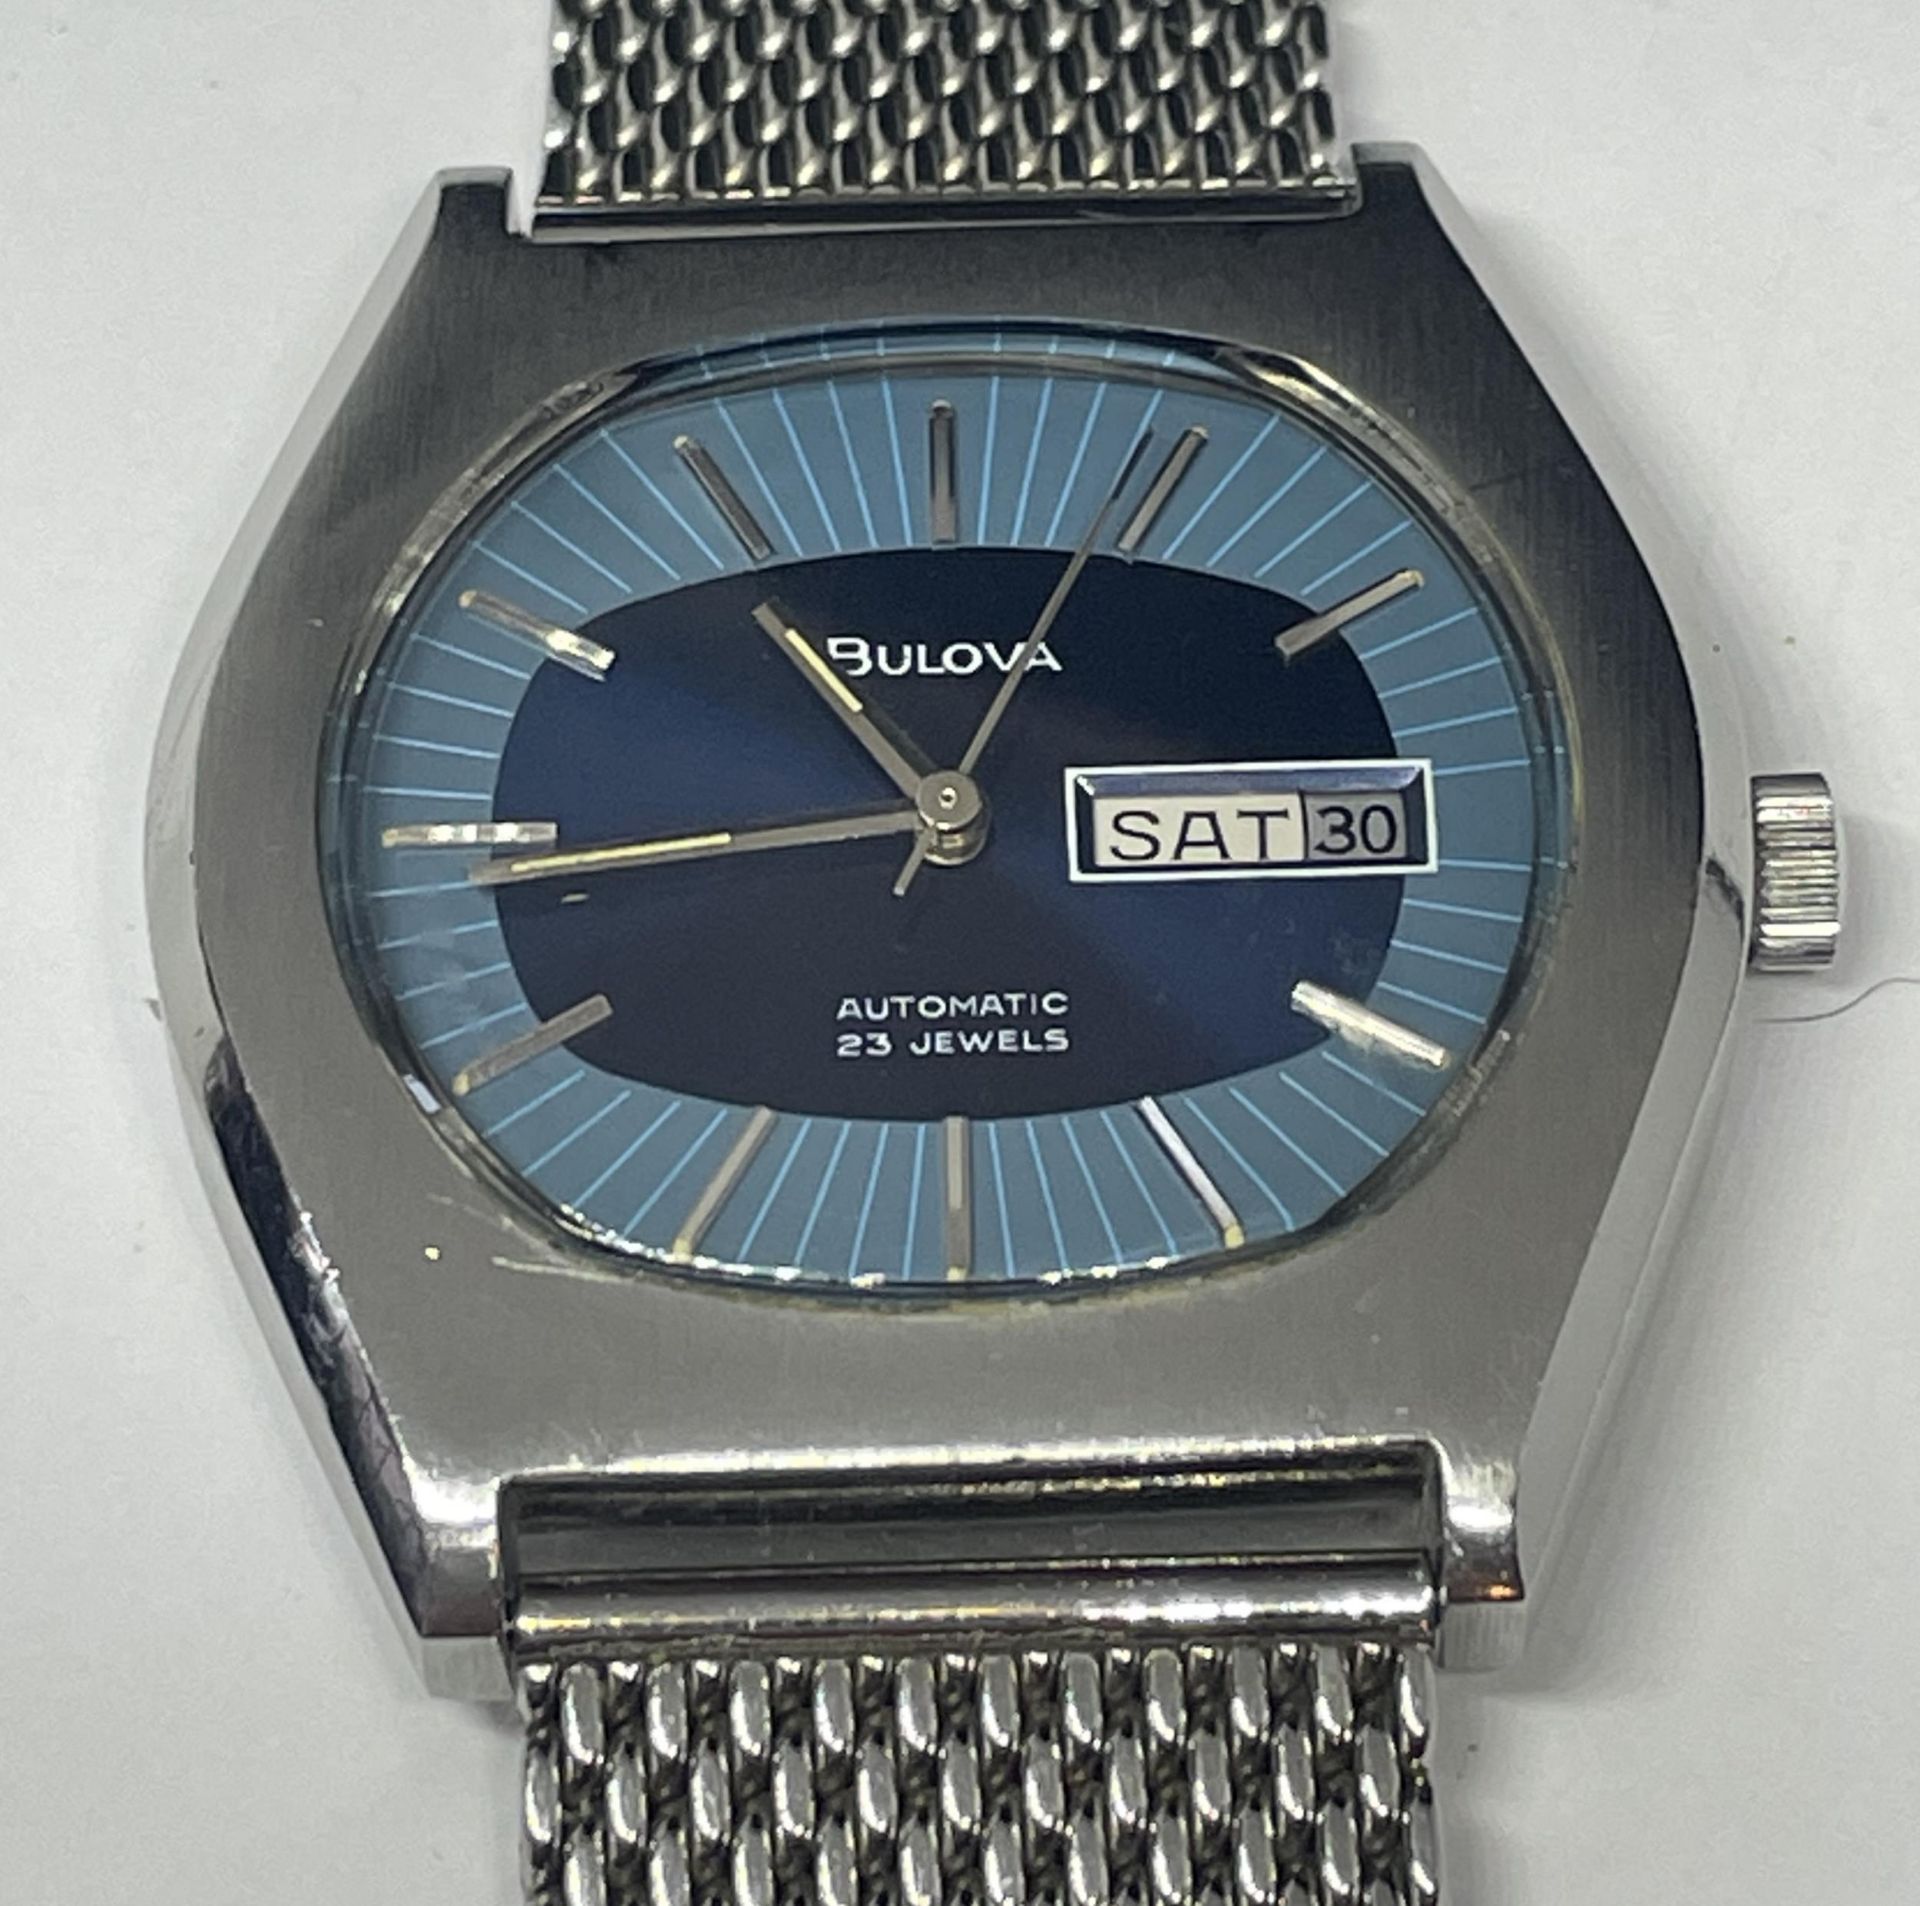 A RARE VINTAGE BULOVA AUTOMATIC GENTS N2 WRIST WATCH, SEEN WORKING BUT NO WARRANTIES GIVEN